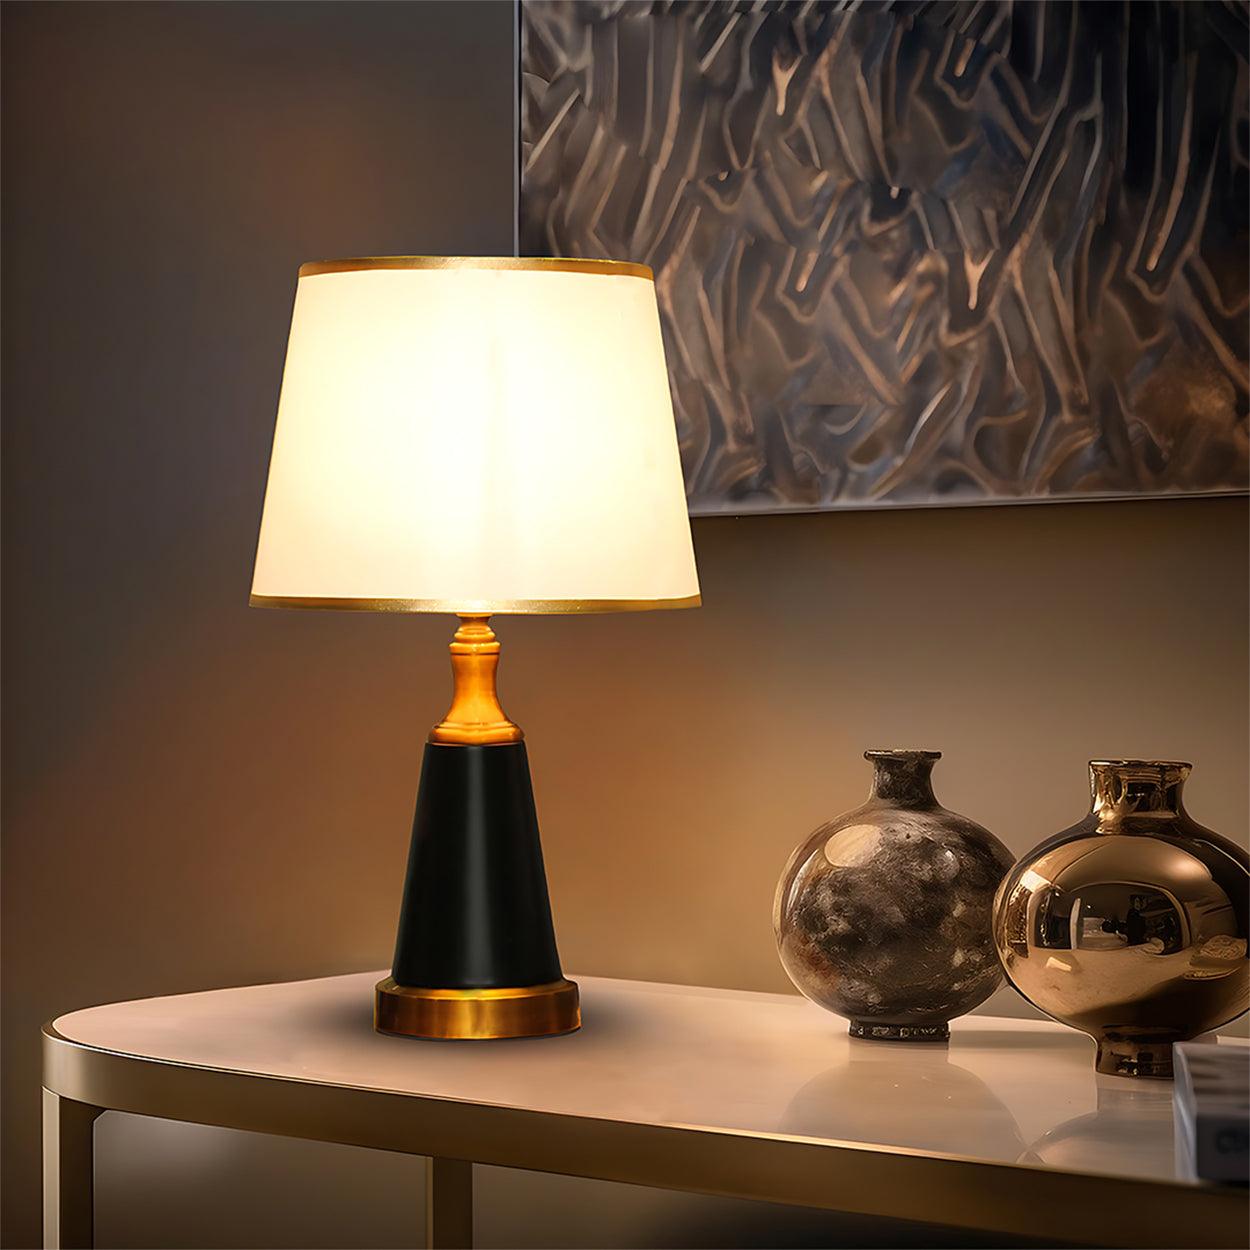 ORI MODERN TOUCH STYLE TABLE LAMP BEDSIDE LAMP - Ankur Lighting